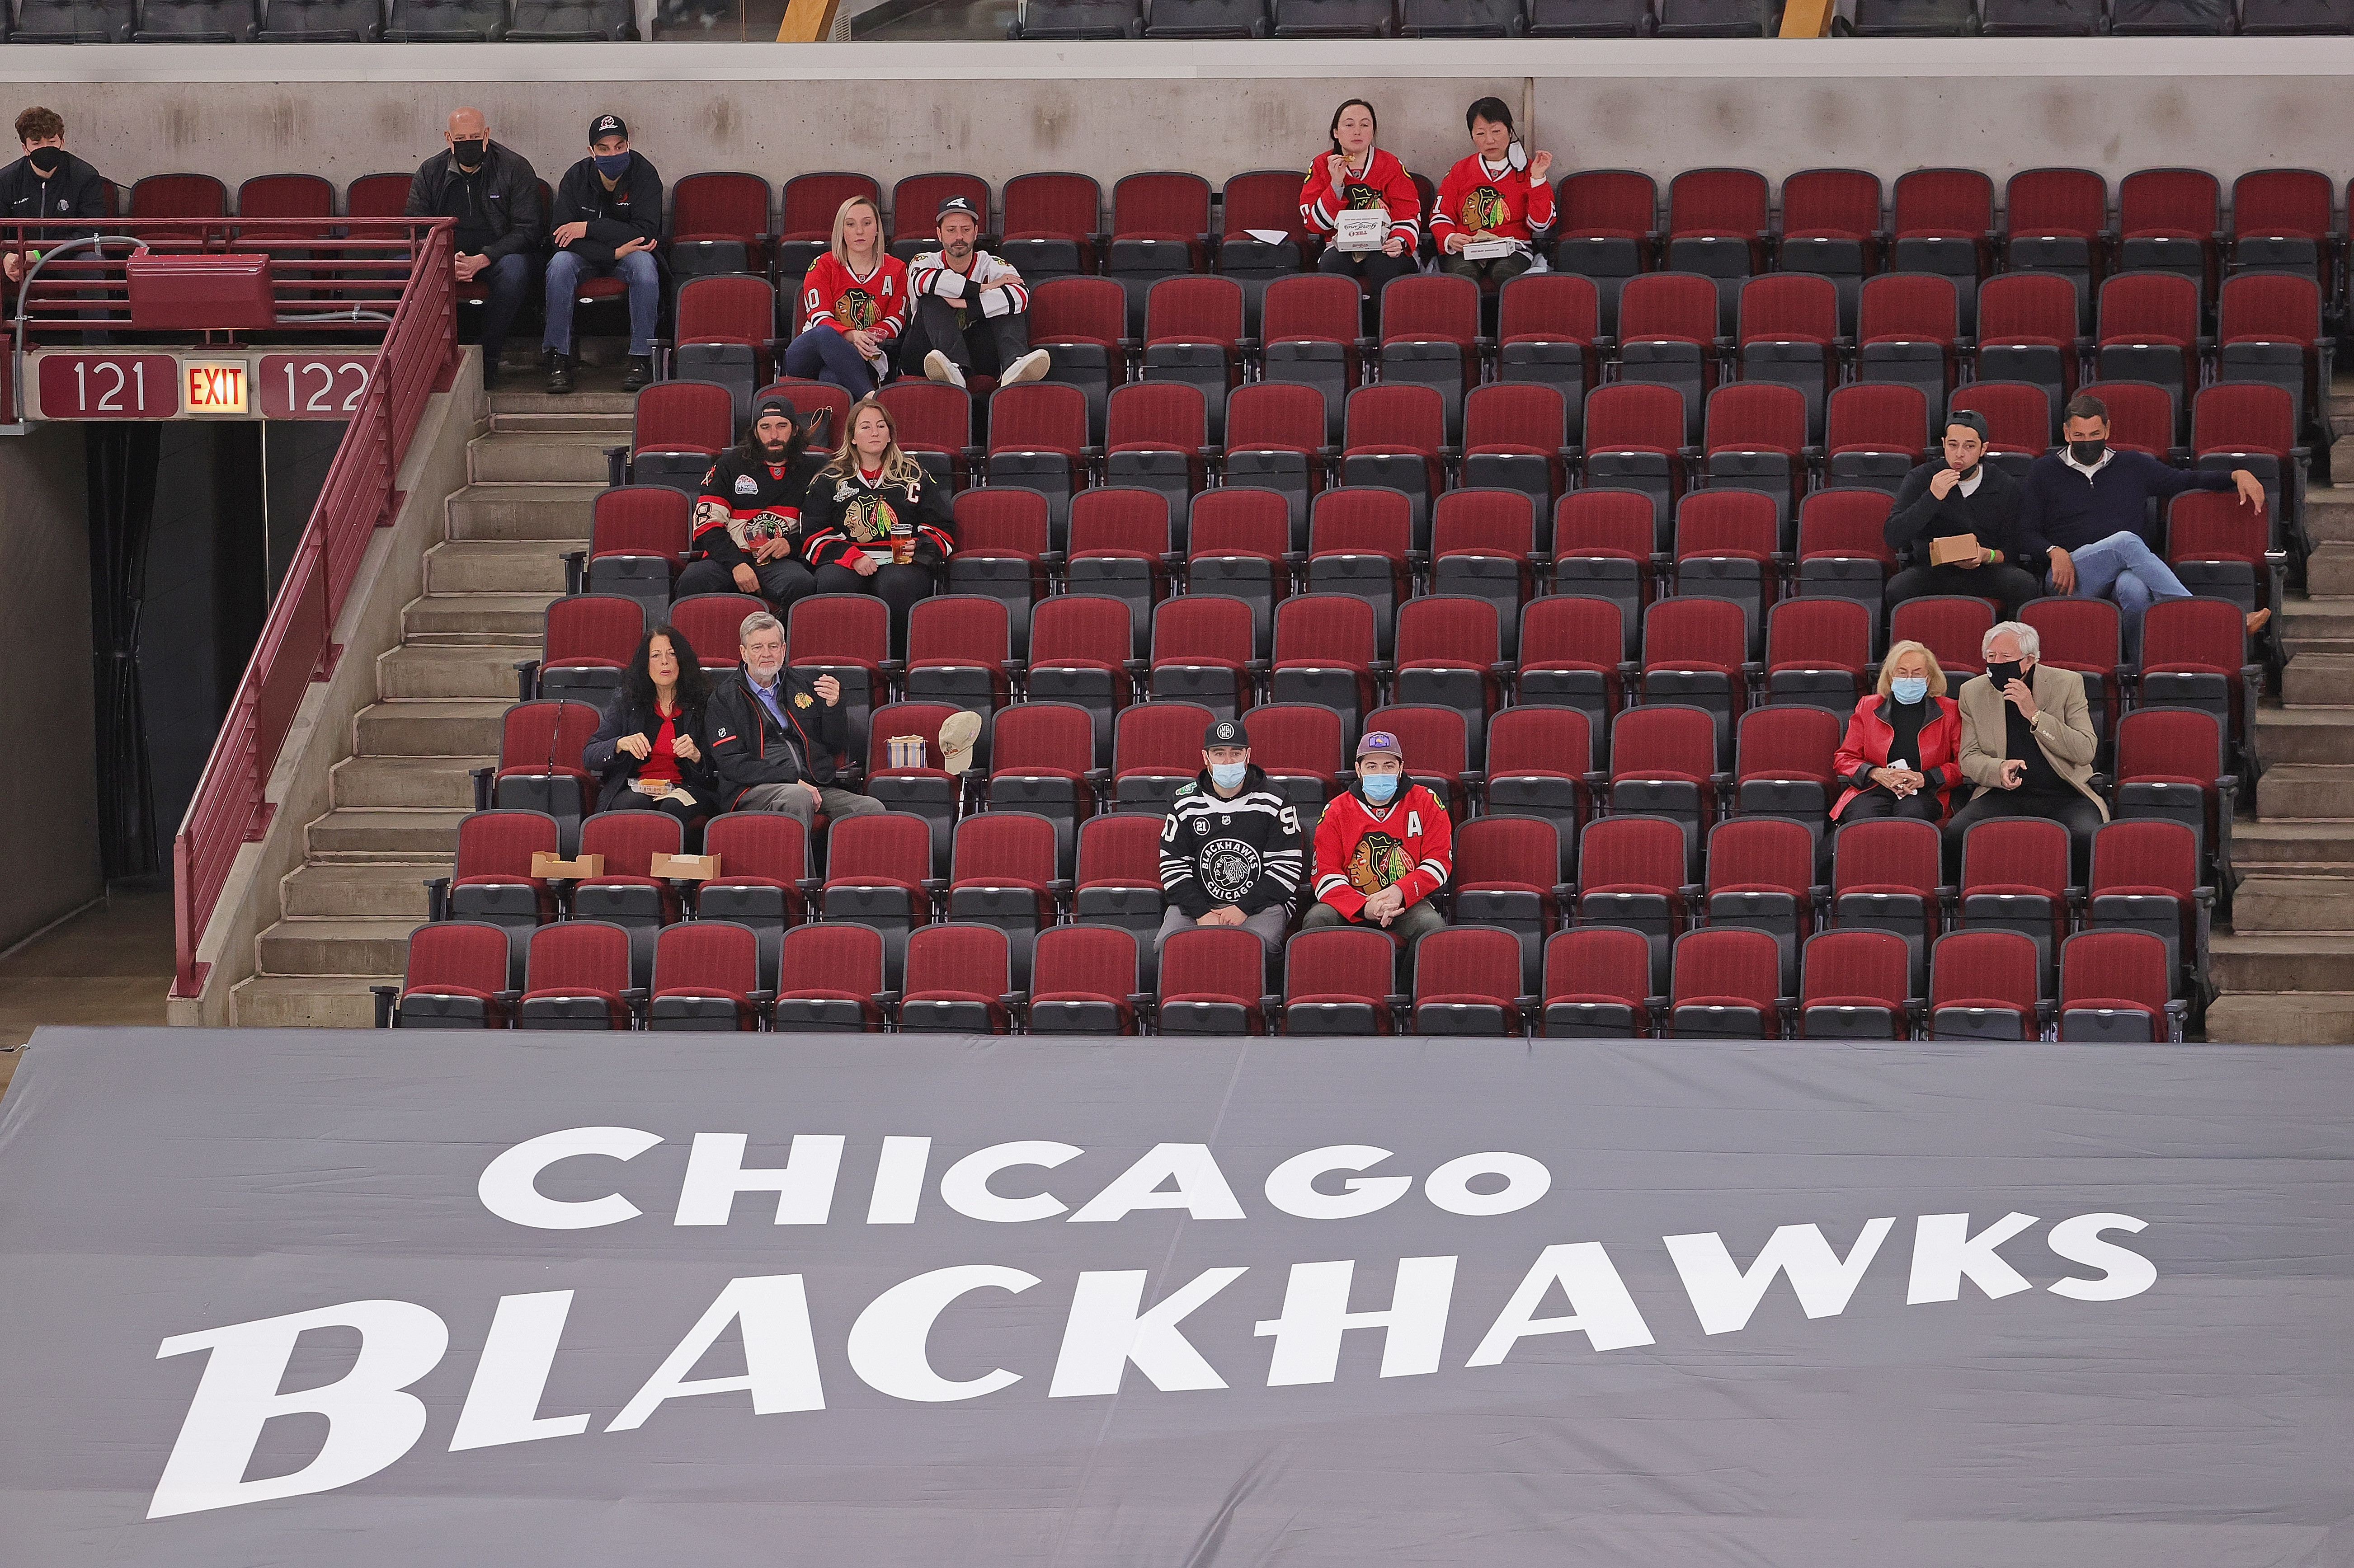 Blackhawks Hire Firm to Conduct Independent Review of Brad Aldrich Allegations